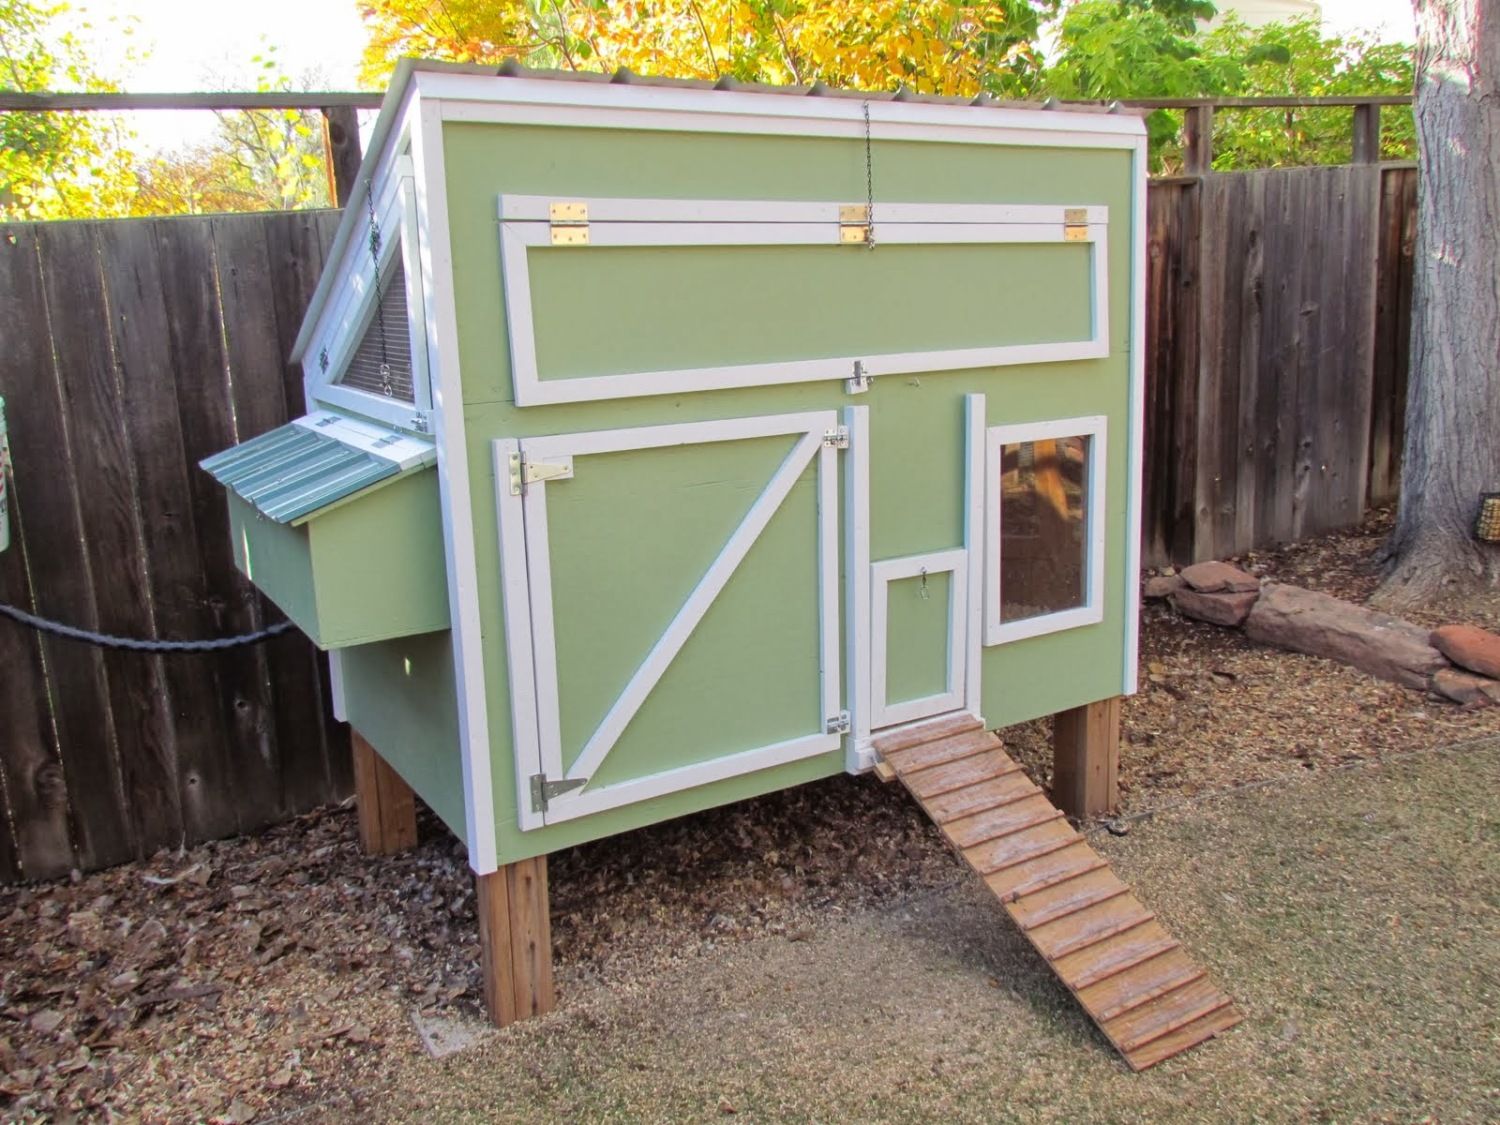 Recycled Chicken Coop! Mobile, Insulated, easy to clean, and only